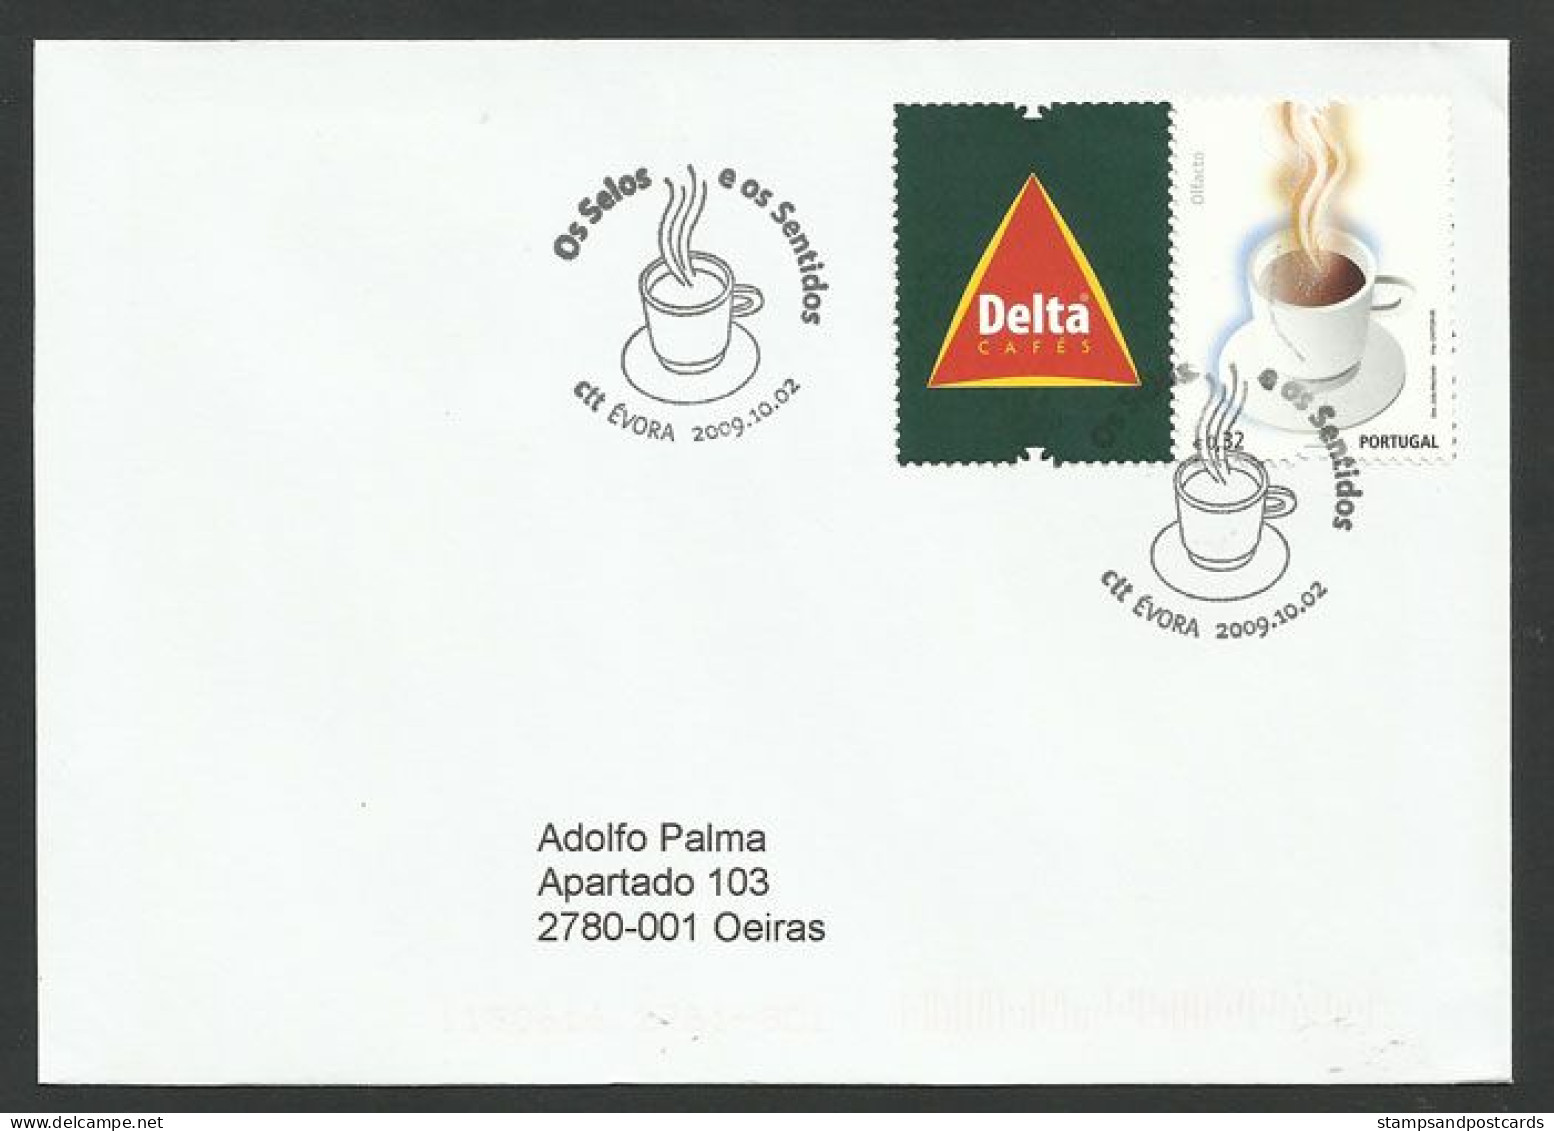 Portugal FDC Voyagé Timbre Avec Vignette Delta Odeur Café 2009 Postally Used FDC Coffee Smell Stamp Corporate - FDC